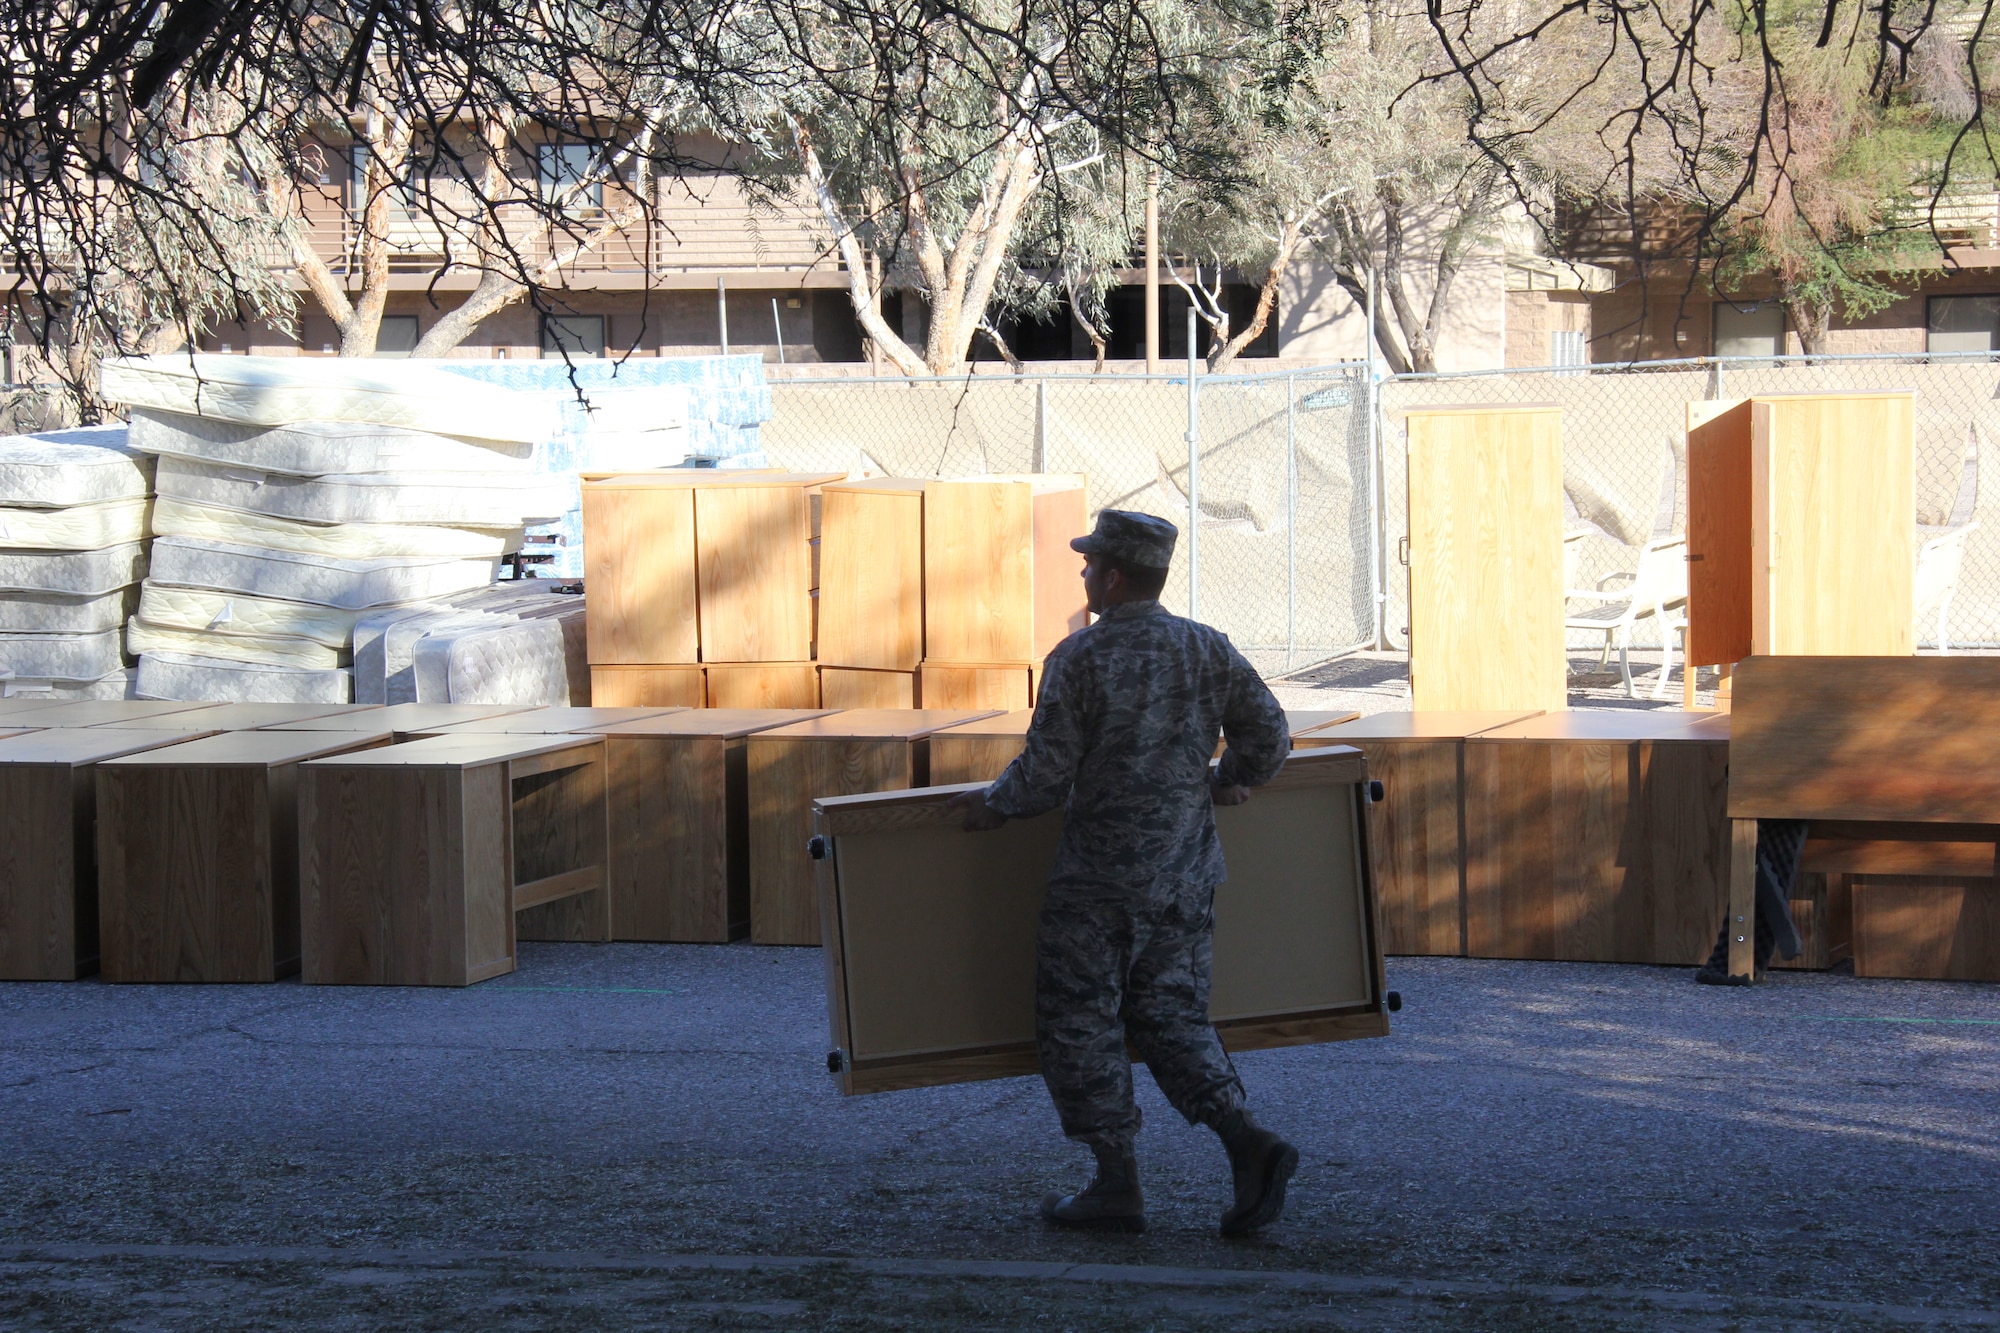 Technical Sgt. Ian Lutjens, 355th Contracting Squadron, carries furniture out of an empty dorm on Davis-Monthan Air Force Base. The furniture donations will help Tucson meet its goal of housing an additional 75 homeless veterans this year. (Courtesy Photo)